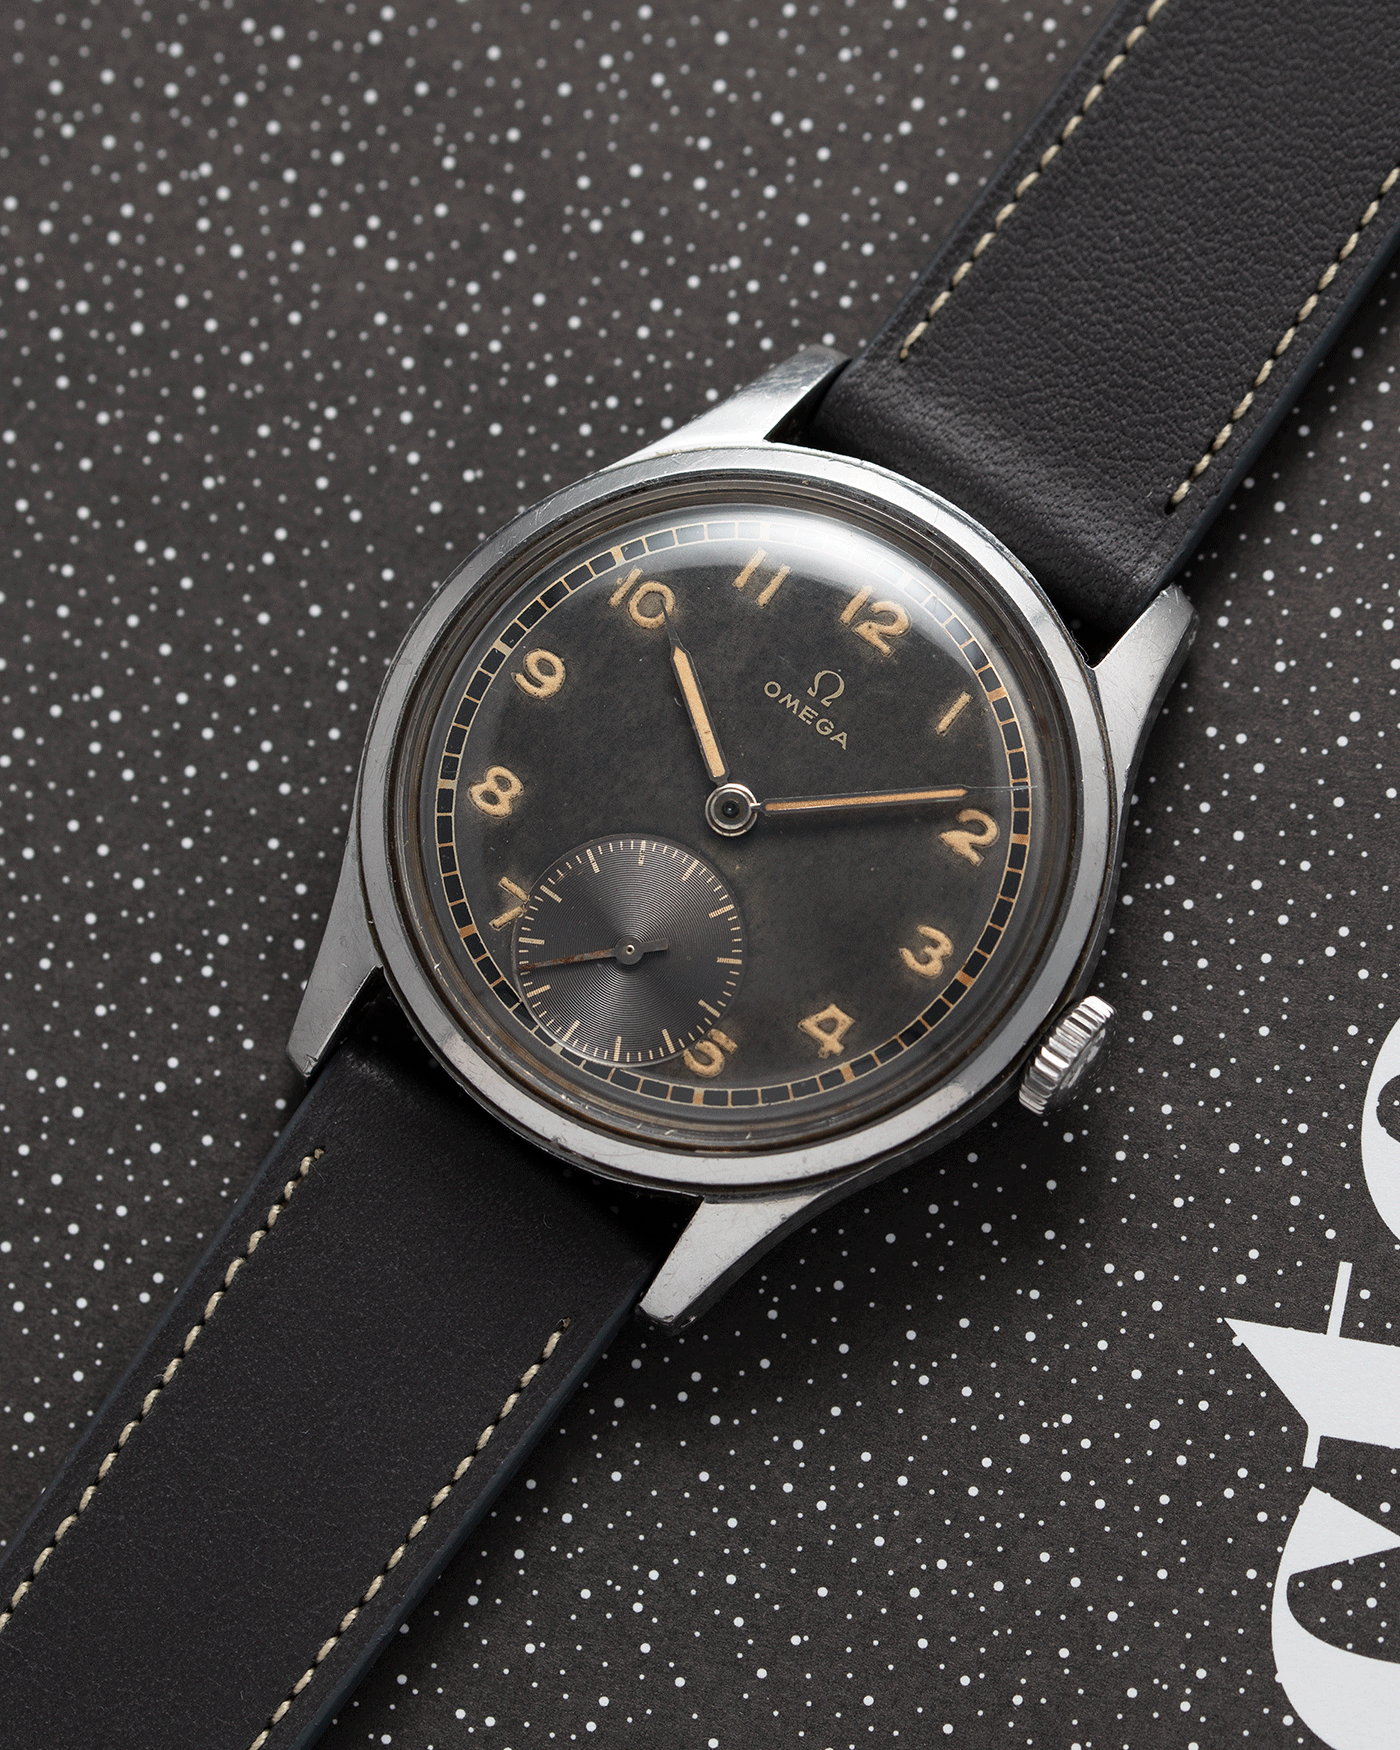 Brand: Omega Year: Approx 1944 Reference Number: 2400-4 Serial Number: 1057XXXX Material: Stainless Steel Movement: Omega 30T2 Case Diameter: 35mm Lug Width: 18mm Bracelet: Nostime Elephant Grey Smooth Calf